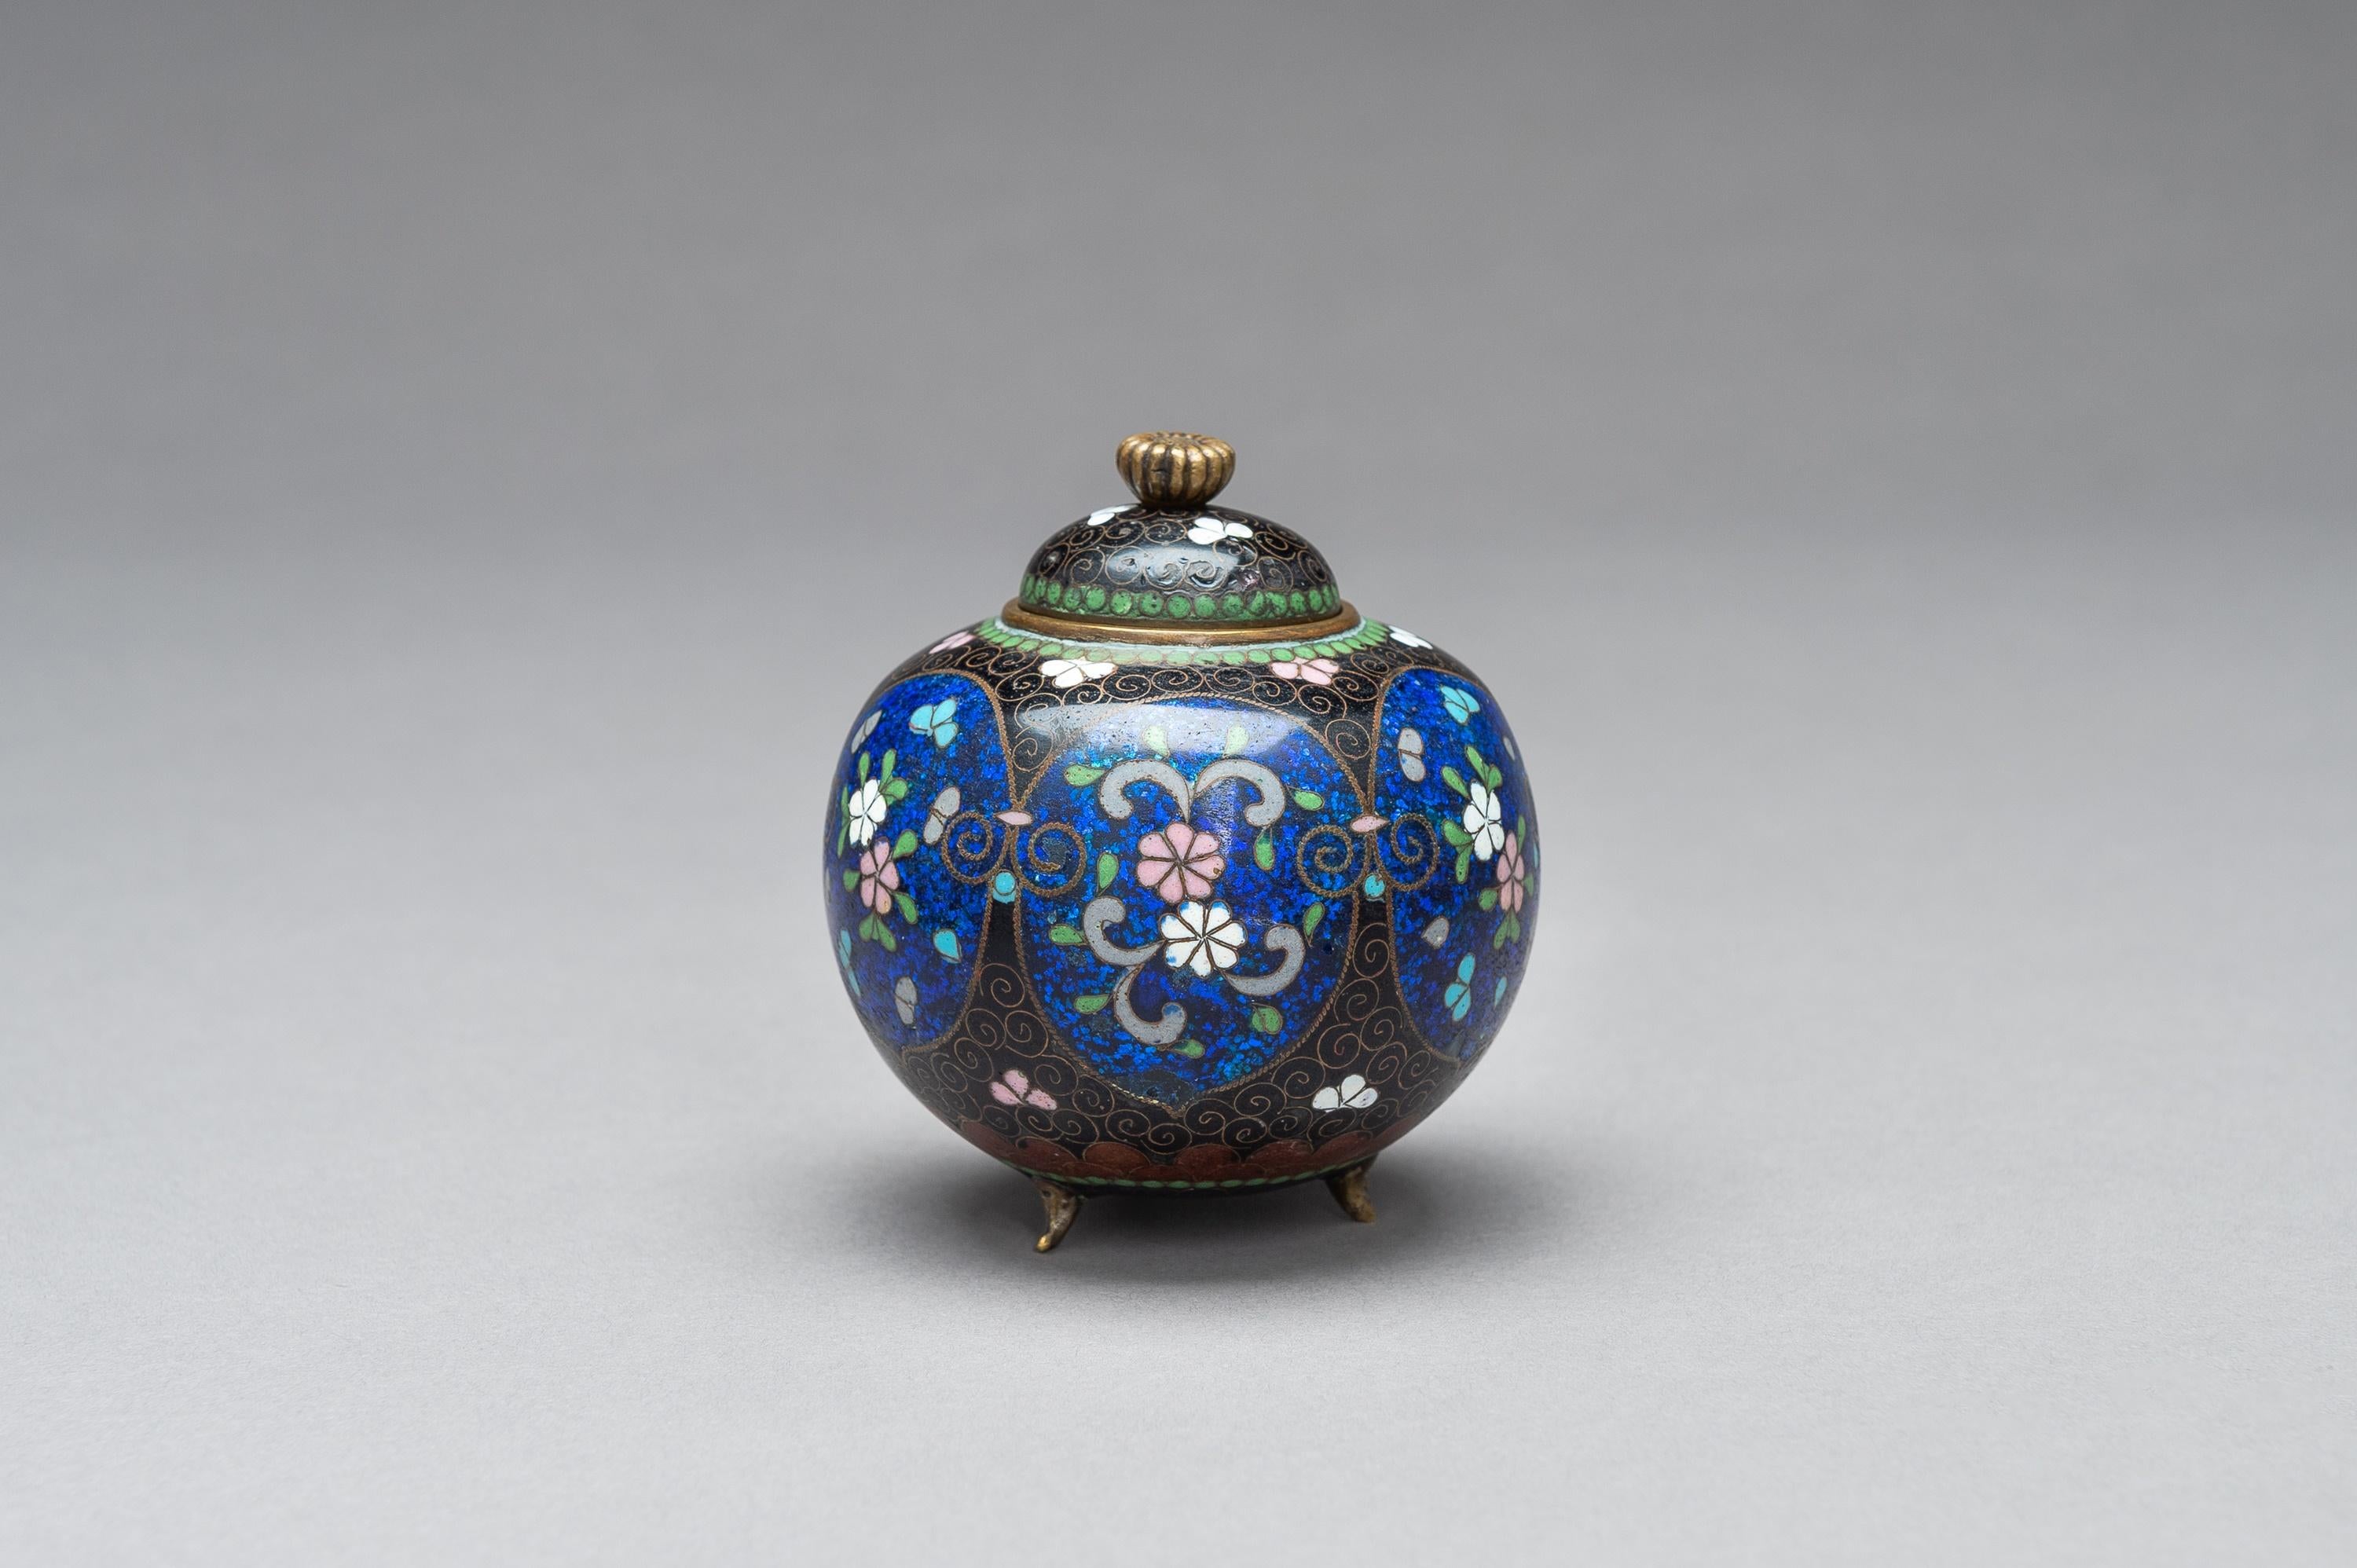 20th Century Japanese Cloisonné Koro with Cover, Meiji Period